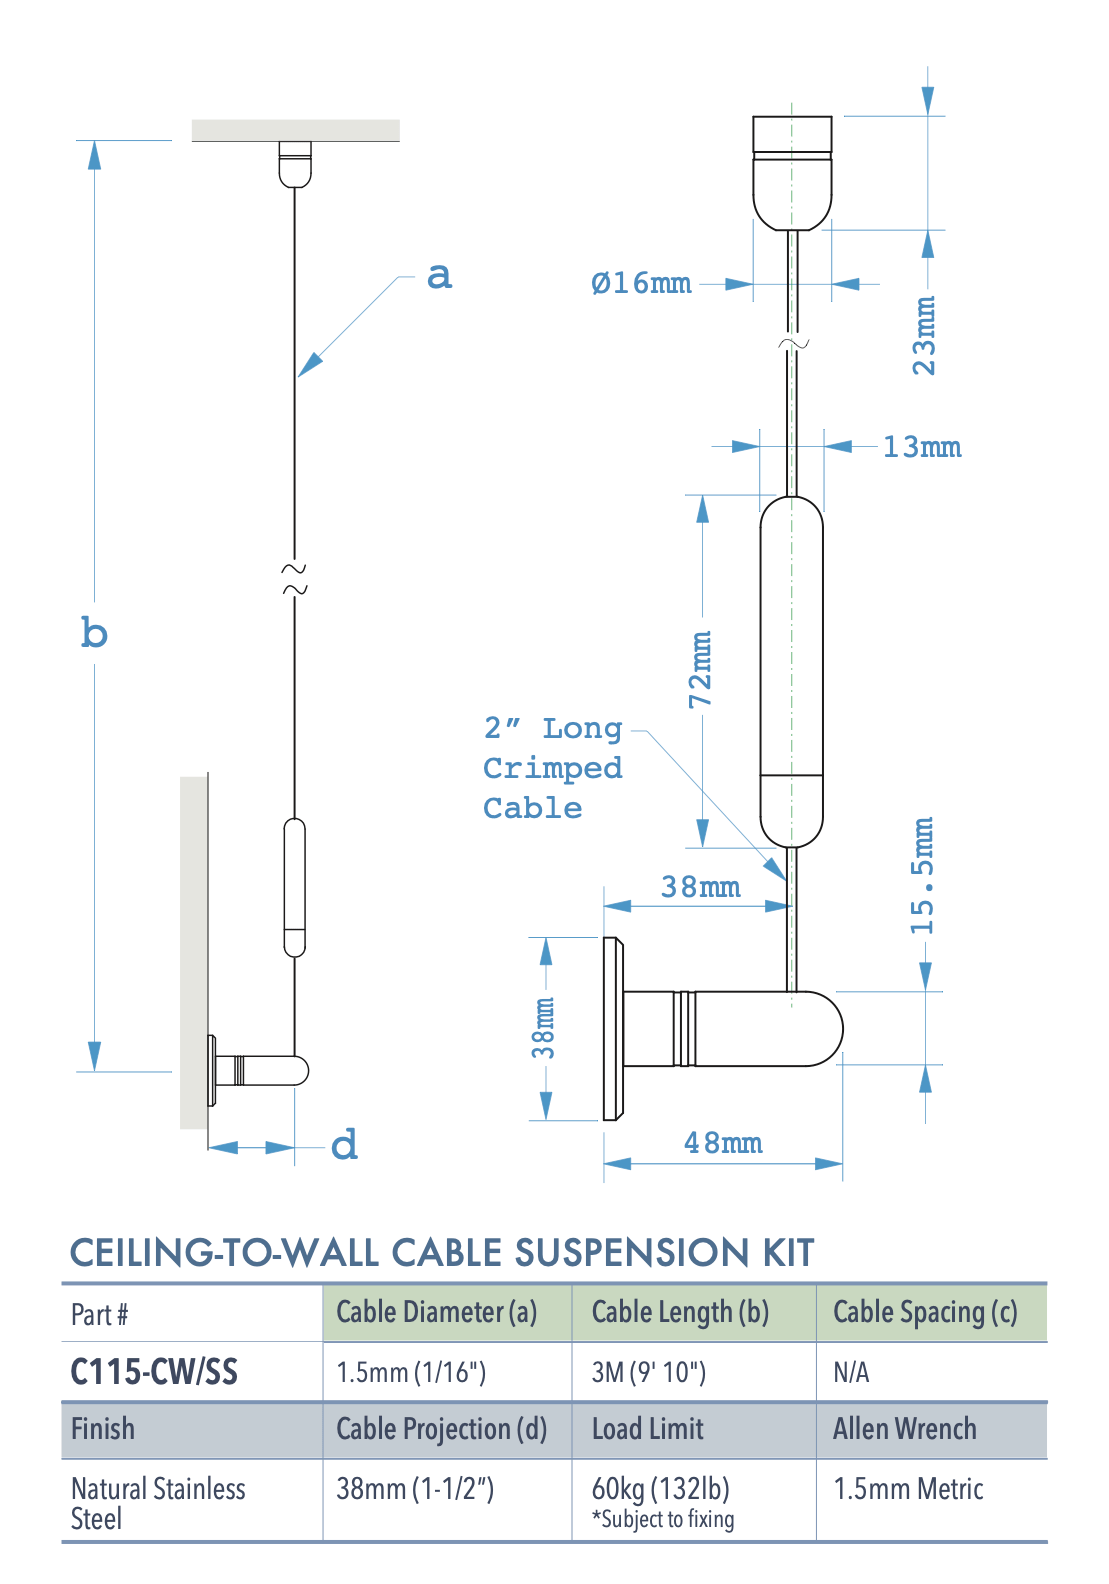 Specifications for C115-CW-SS